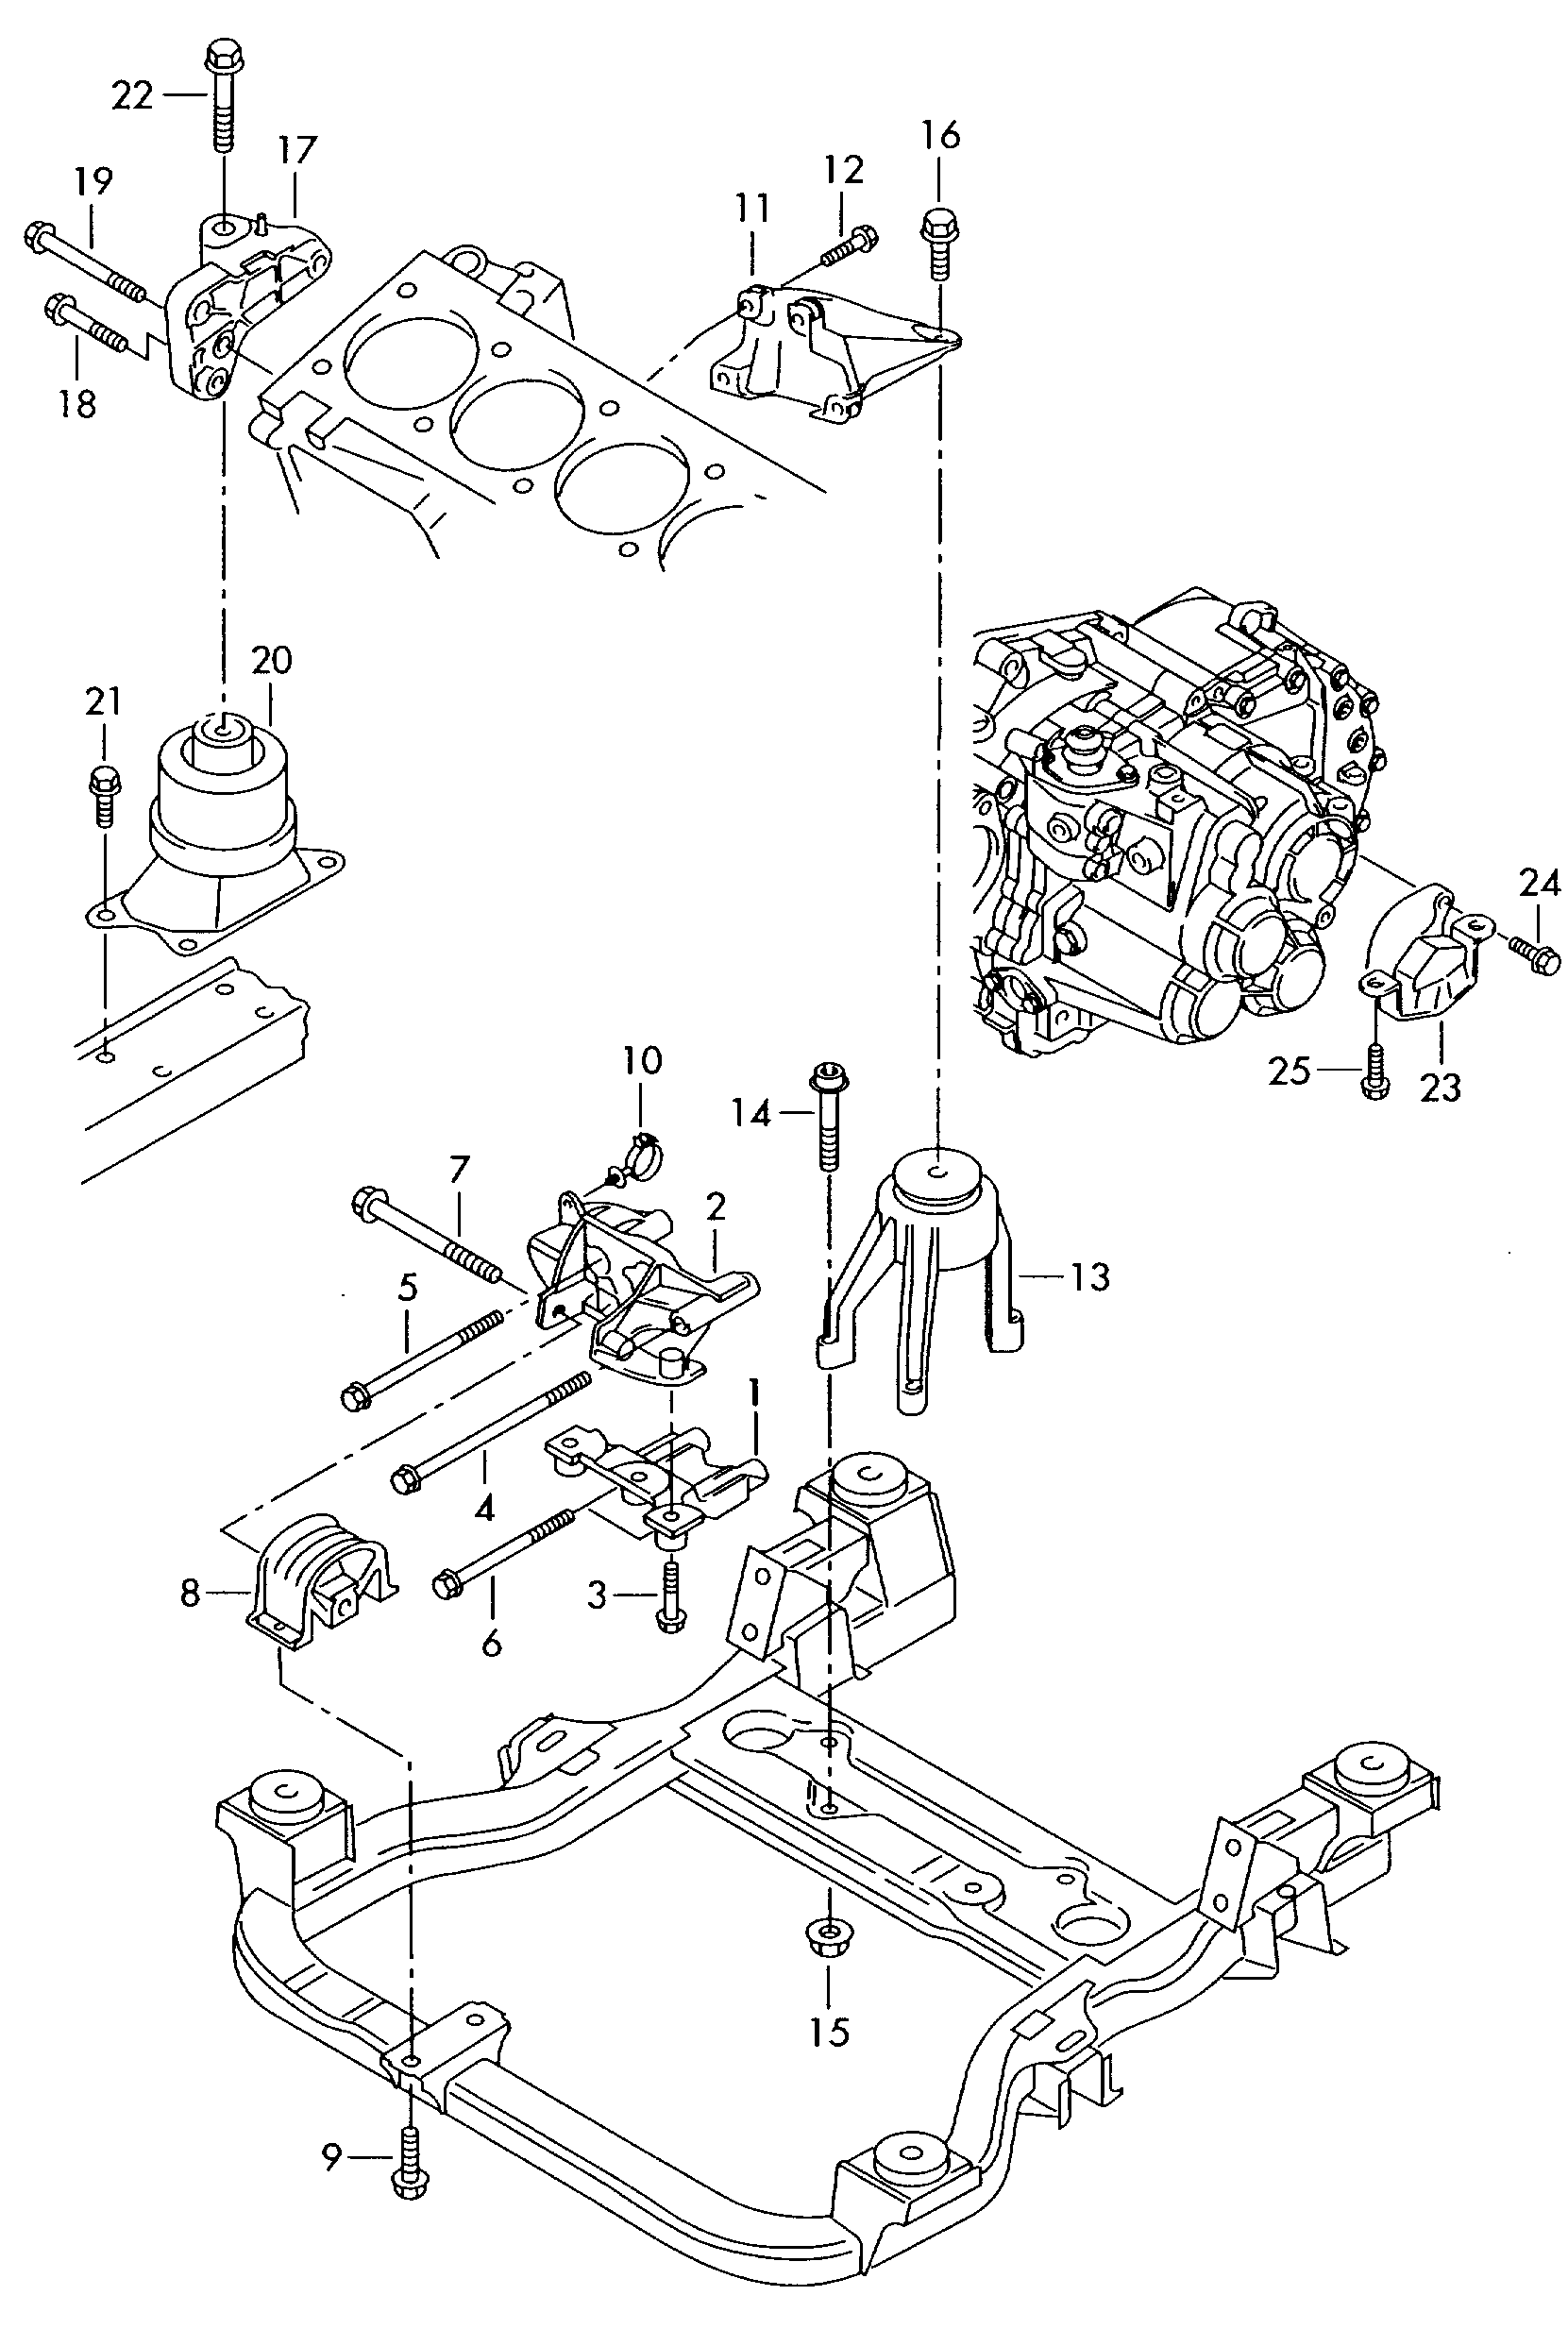 mounting parts for engine and
transmission - Transporter(TR)  